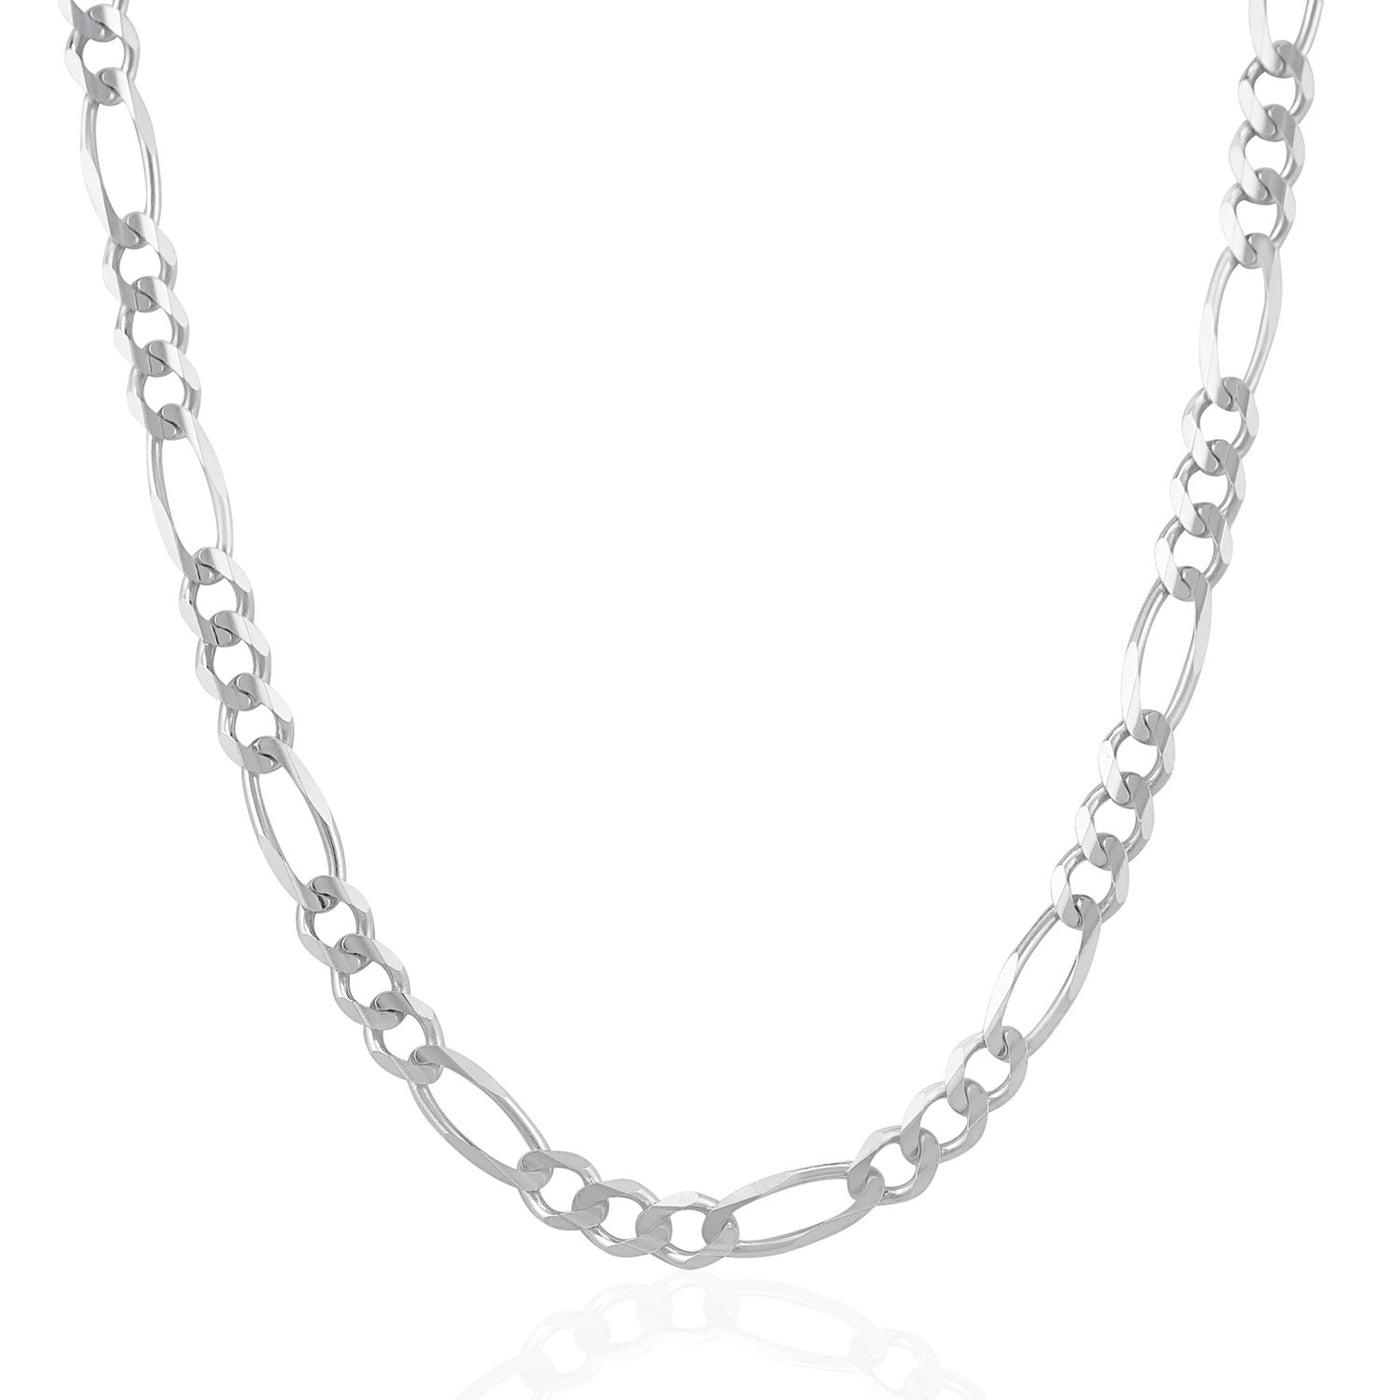 6mm 14k White Gold Solid Figaro Chain